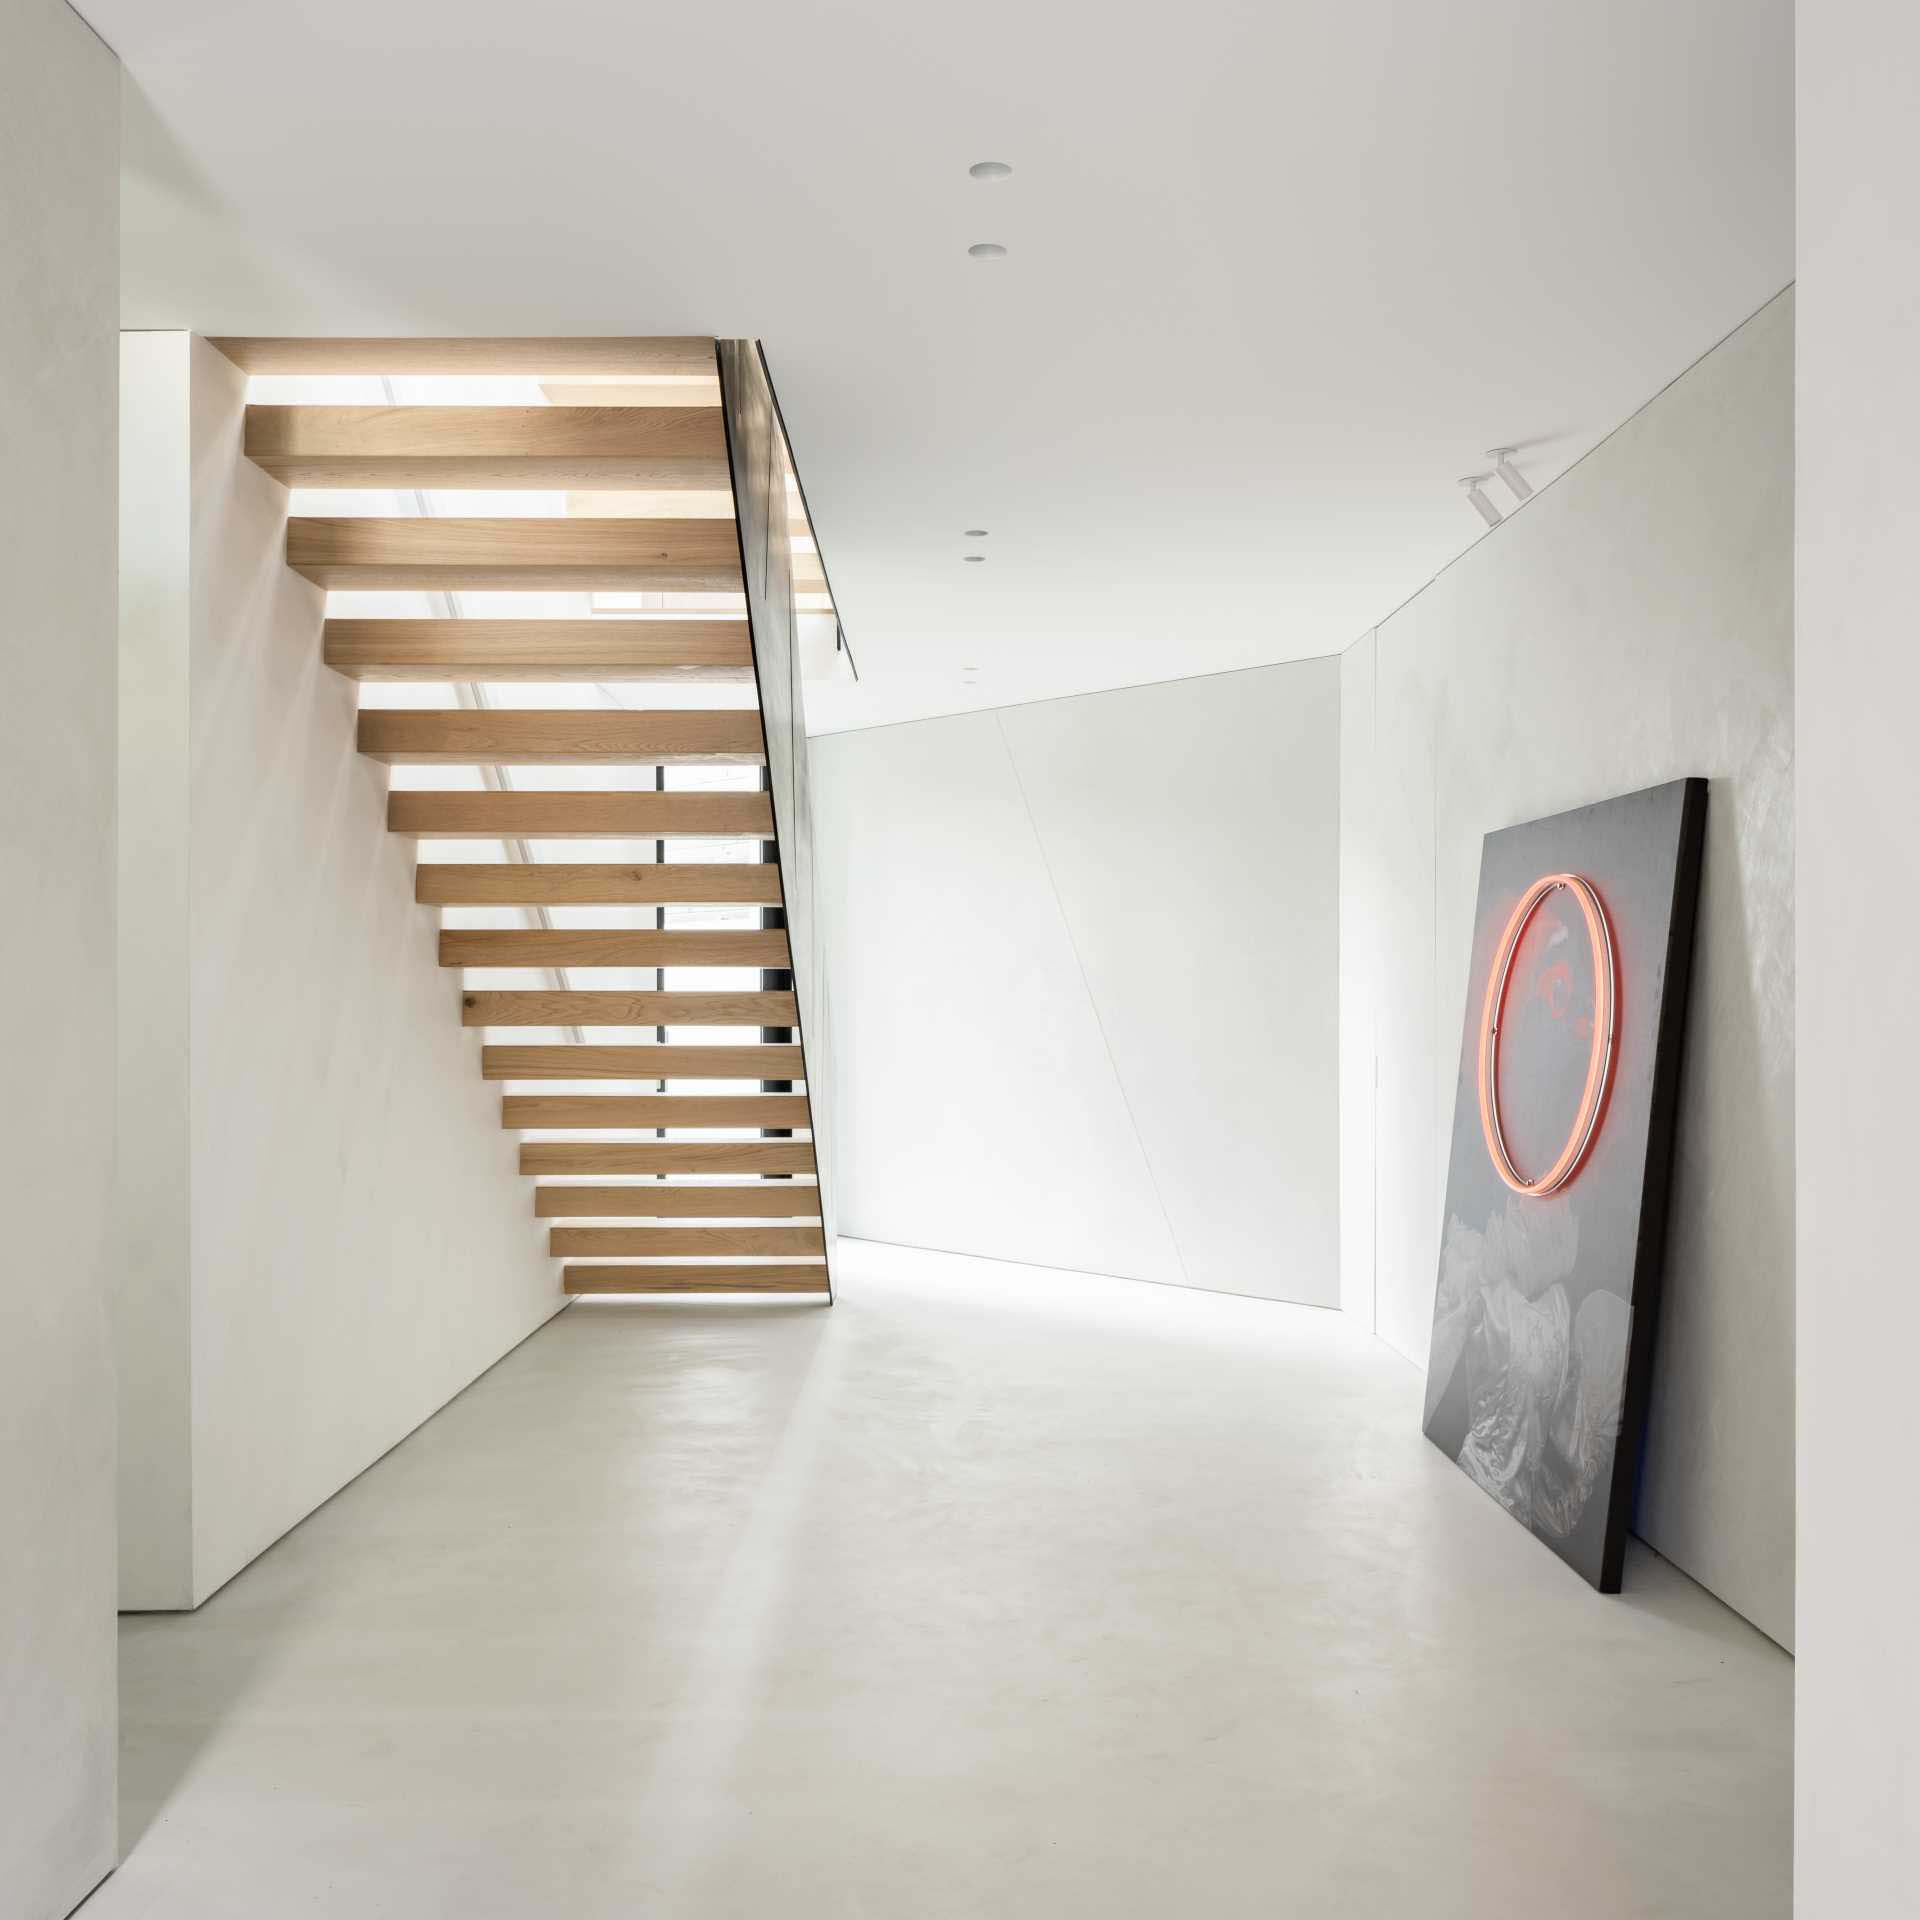 The architectural steel plate staircase with wood treads bounces light throughout the three levels of living space in this modern home.